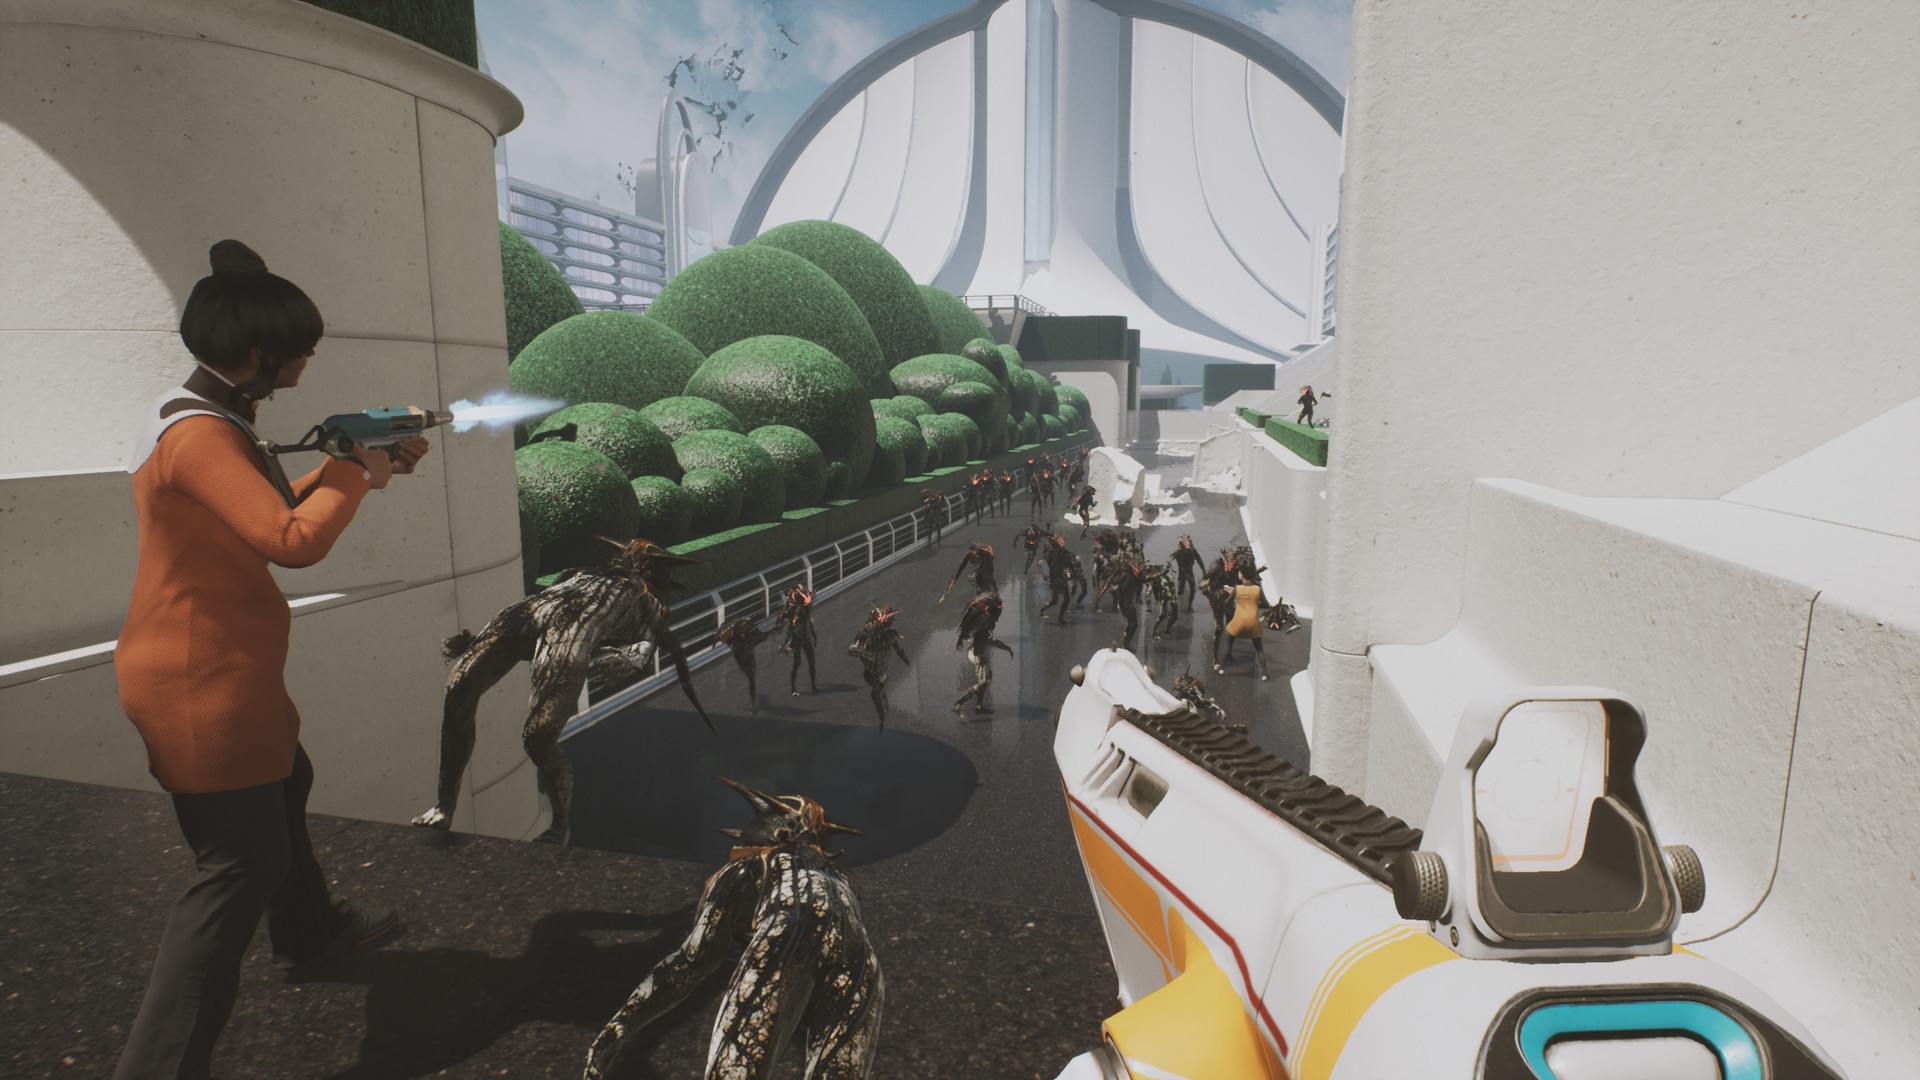 A scene from The Anacrusis from the player's perspective – behind the sights of a laser rifle. Several alien enemies barrel towards the player while a teammate readies herself with her own rifle off to the side.